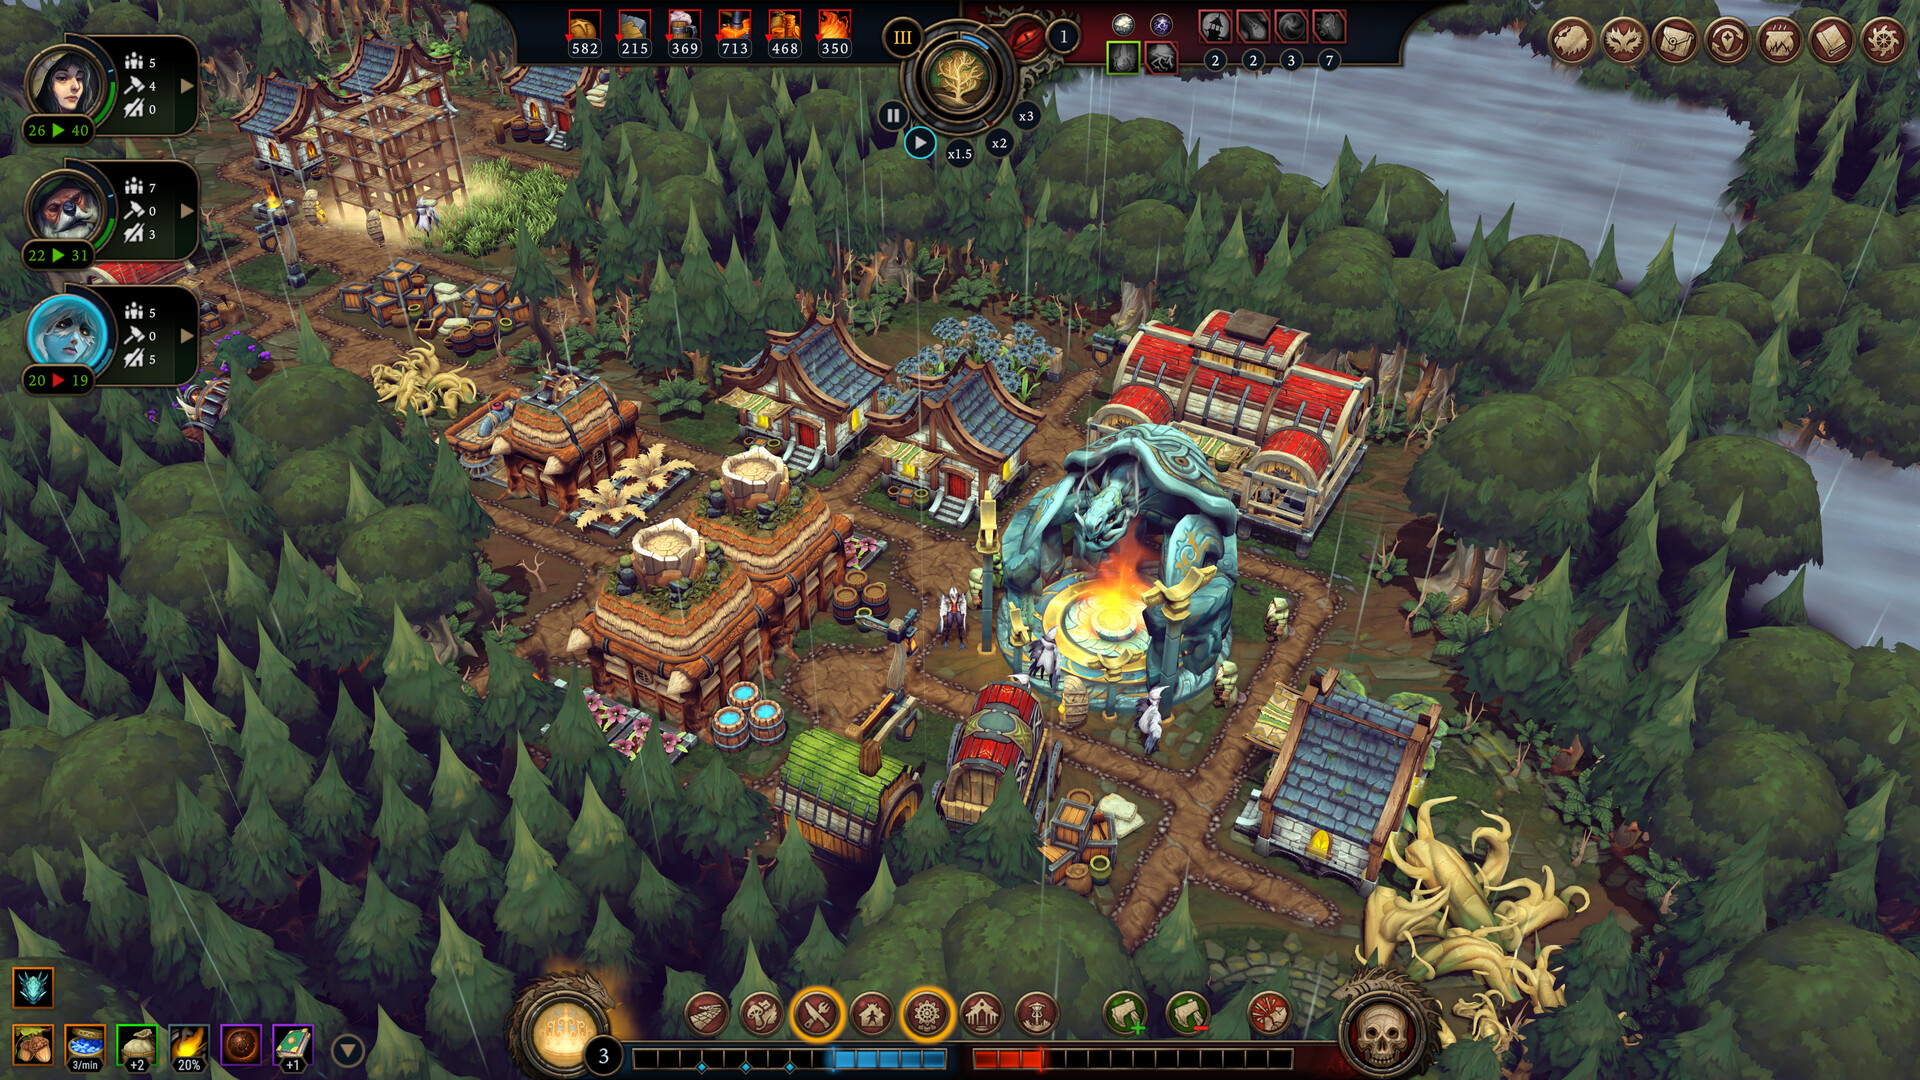 screenshot from the game Against the Storm, showing a settlement and status bars for different character species